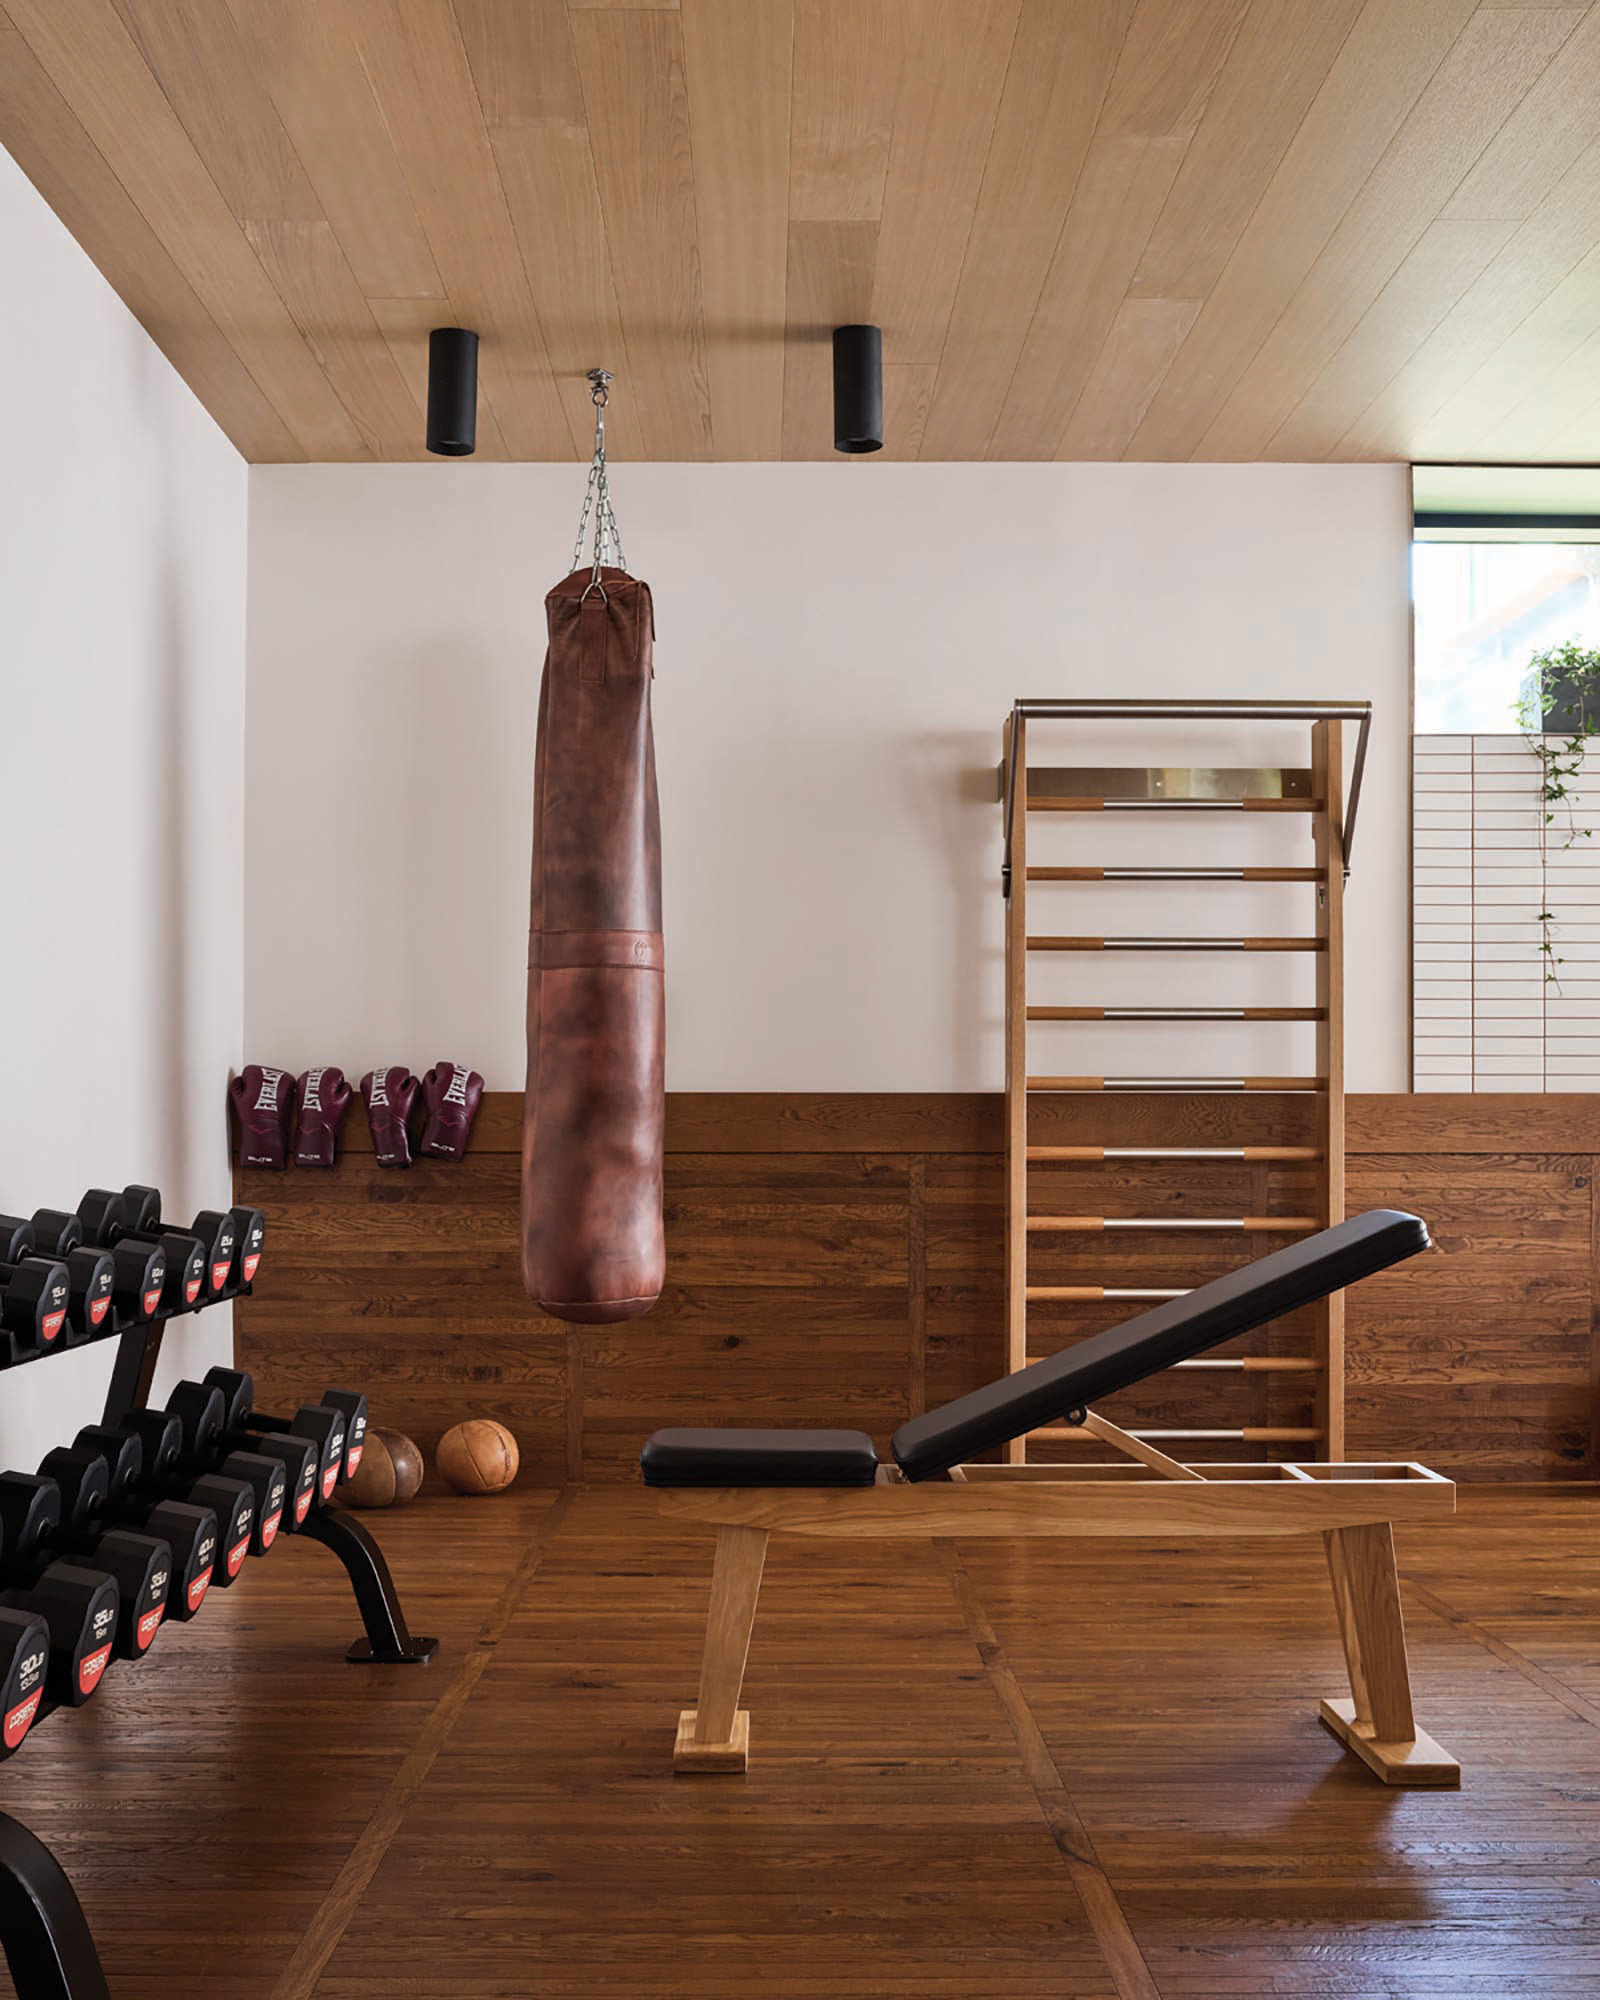 A Scandinavian inspired gym set up at The Royal Hotel gym in Picton, Ontario